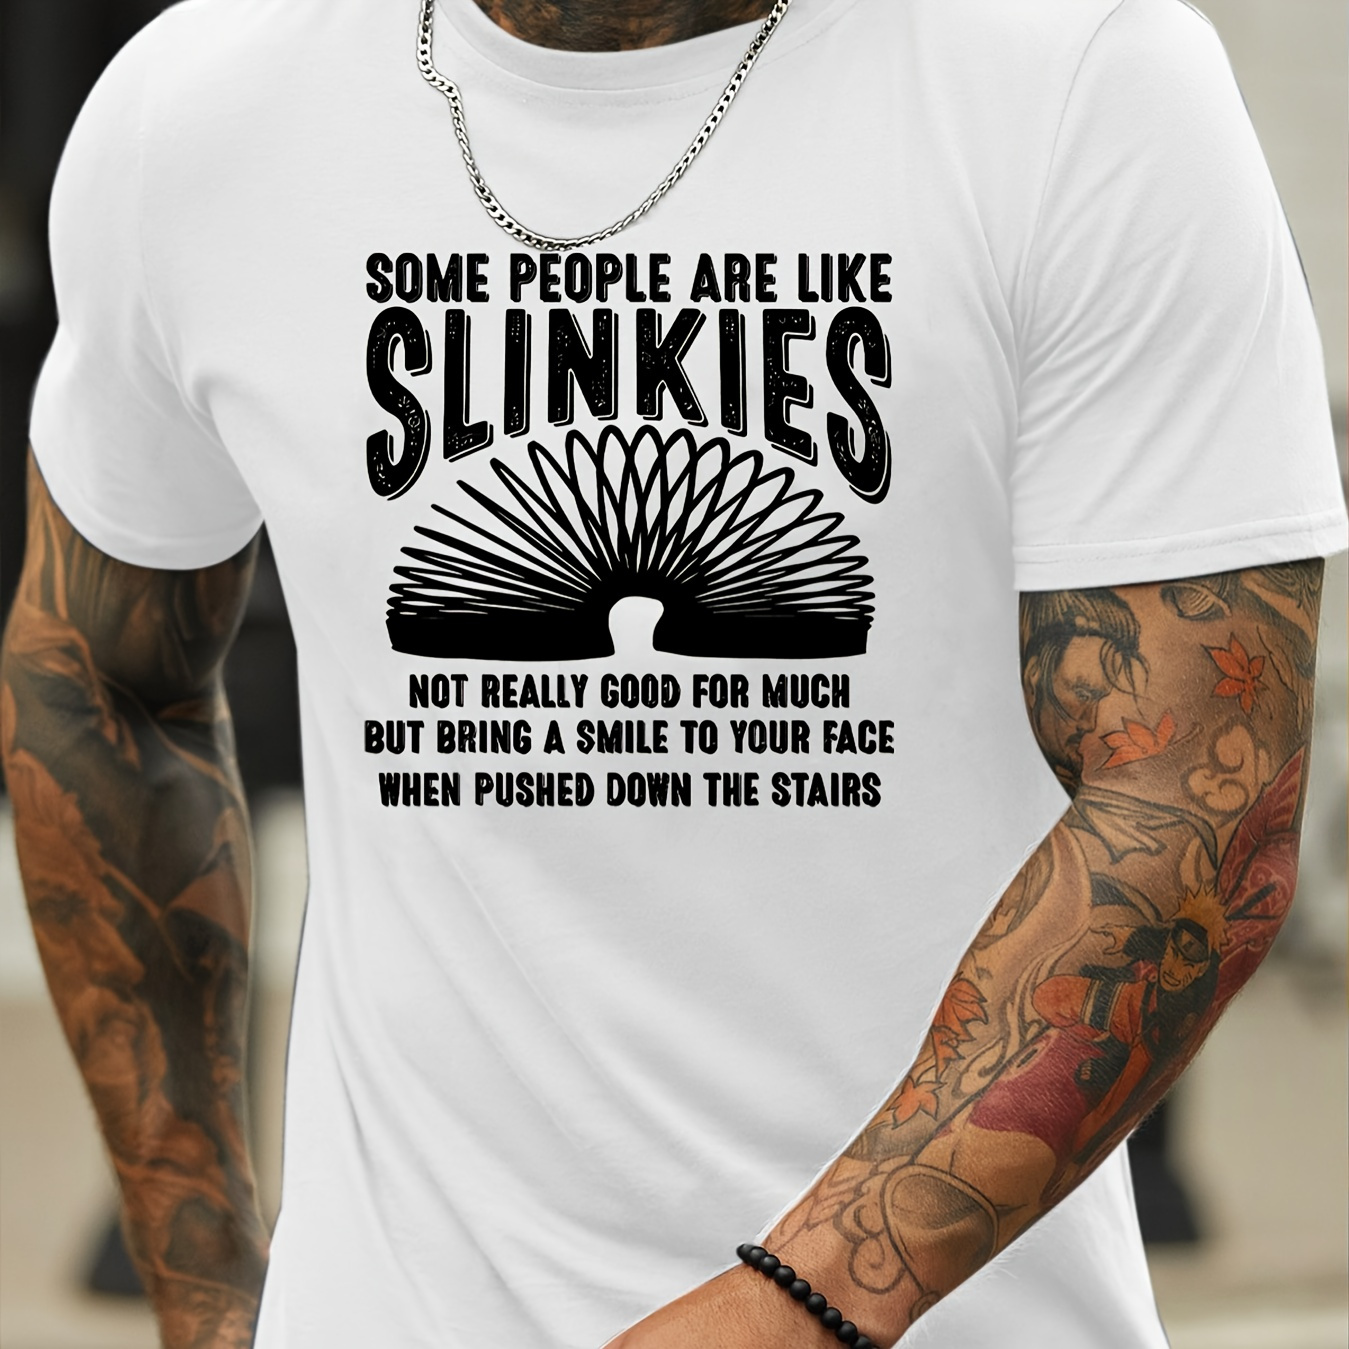 

Some People Are Like Slinkies Print, Men's Comfy T-shirt, Casual Fit Tees For Summer, Men's Clothing Tops For Daily Activities